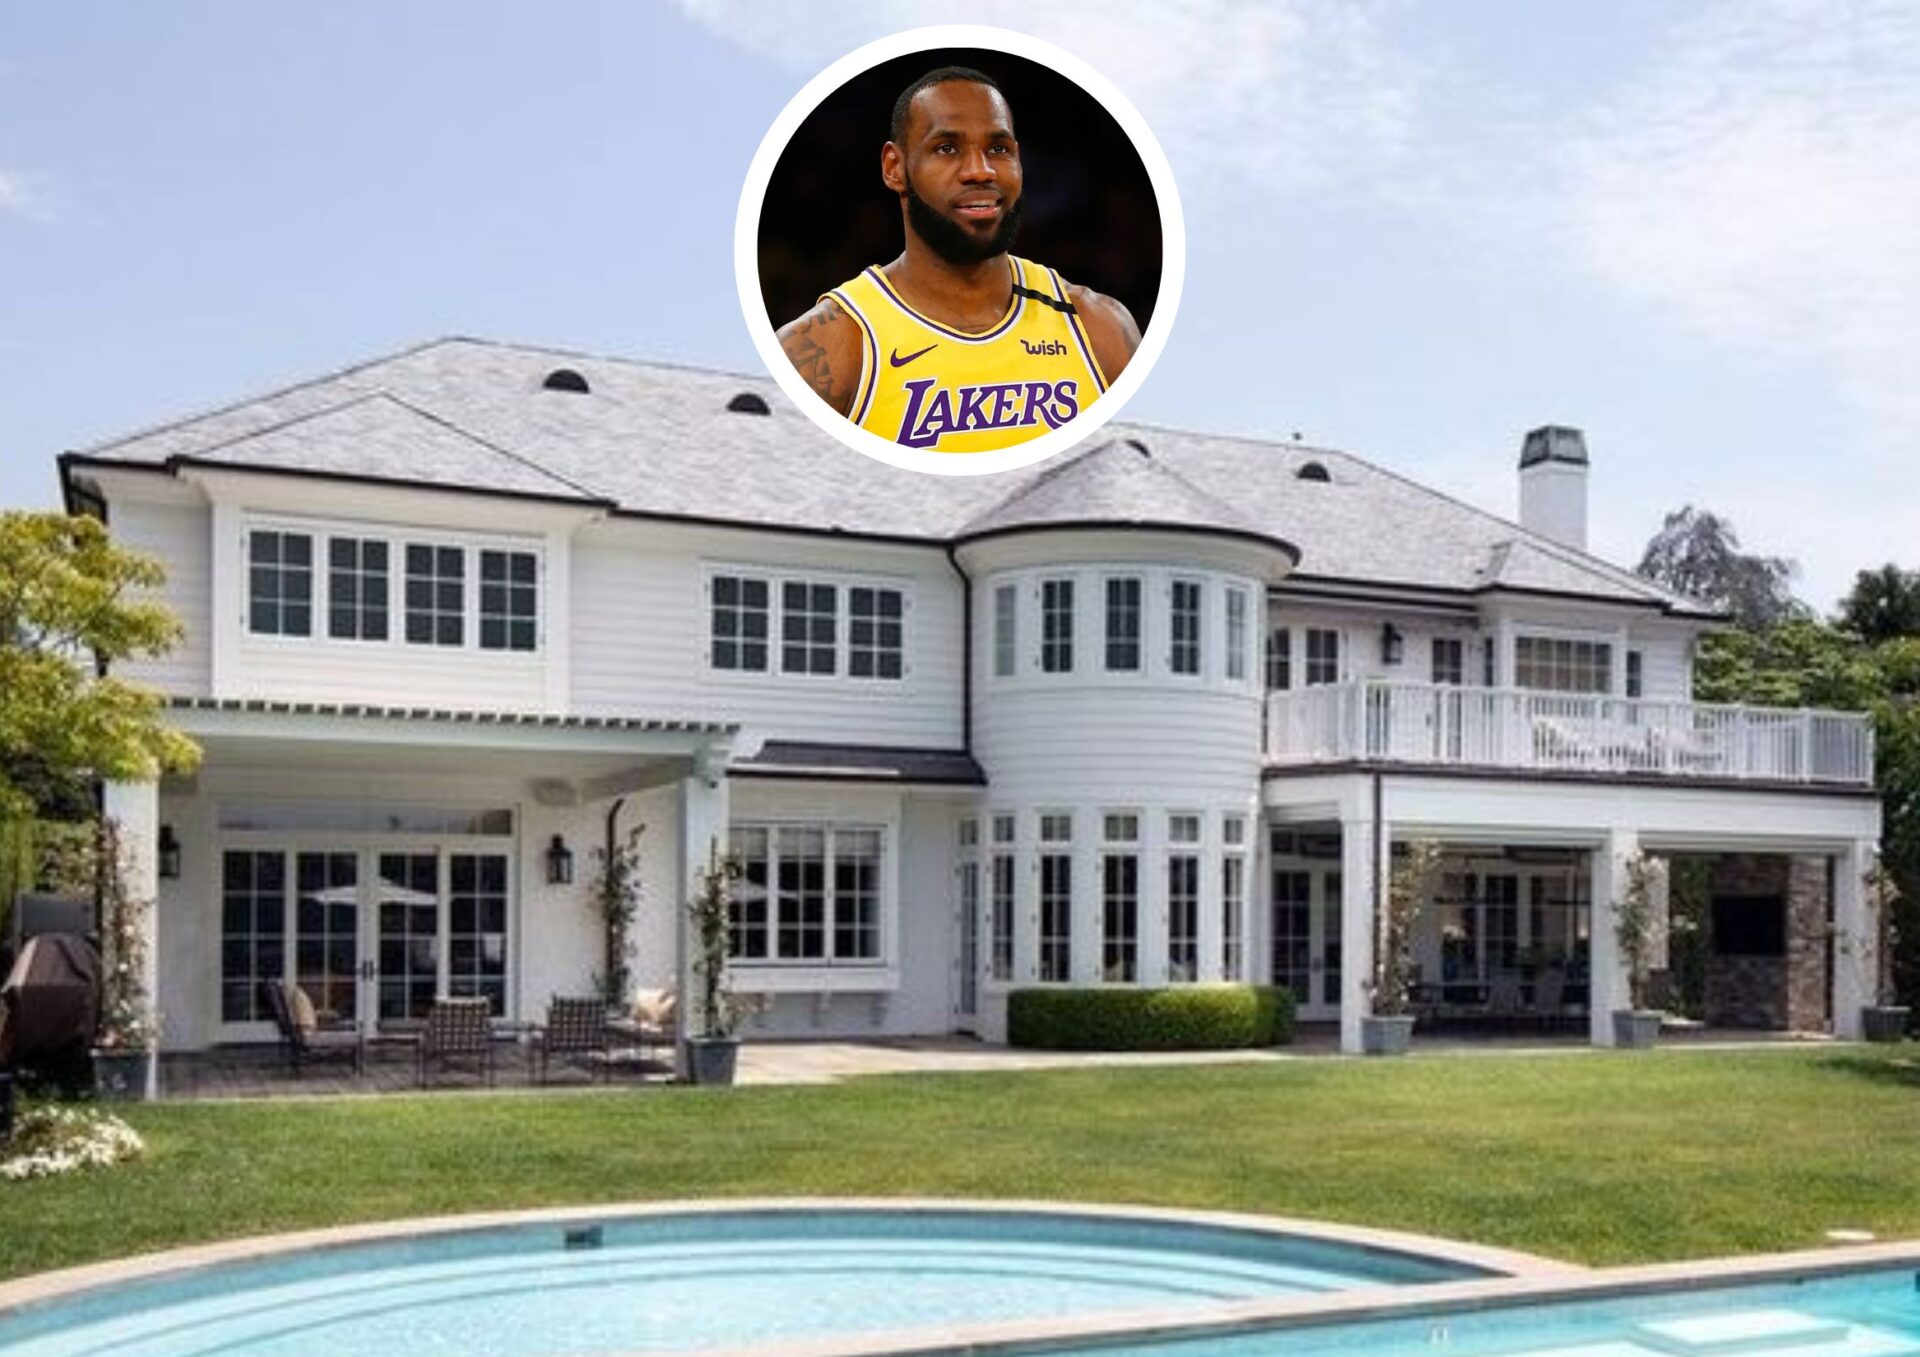 Main Image of Lebron's Brentwood Park Mansion